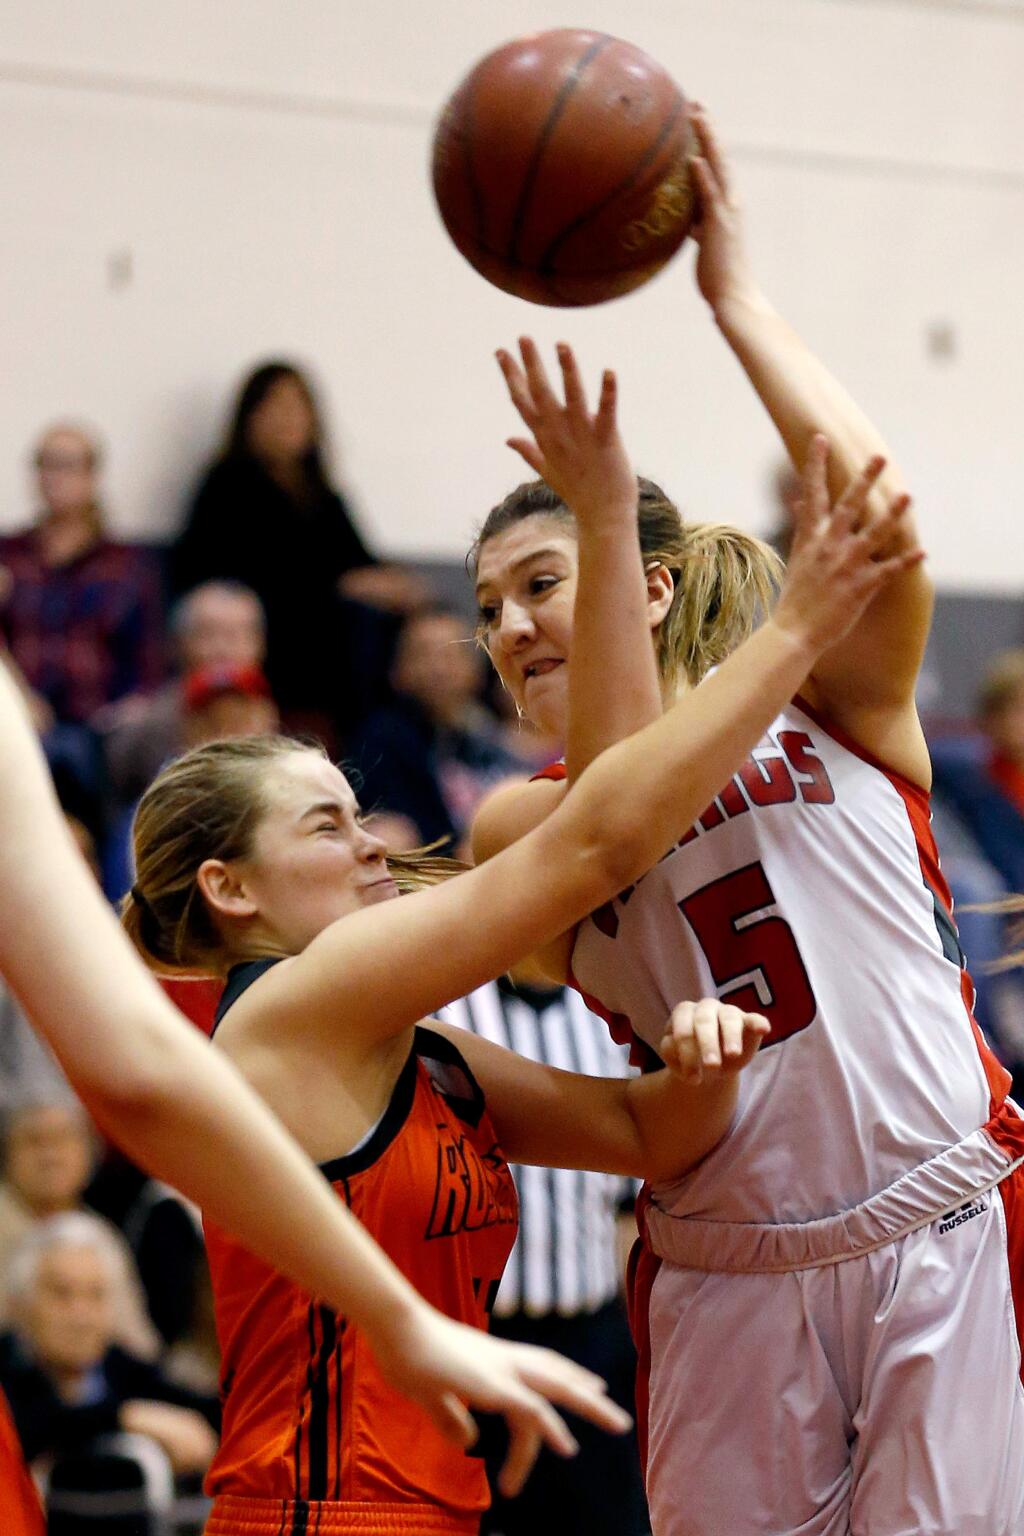 Montgomery's Julia Watson (5), right, dishes a pass toward the baseline while guarded by Roseville's Skyler Rubey (12) during the second half of the CIF NorCal Division II girls varsity basketball first-round playoff game between Roseville and Montgomery high schools in Santa Rosa, California on Wednesday, March 8, 2017. (Alvin Jornada / The Press Democrat)